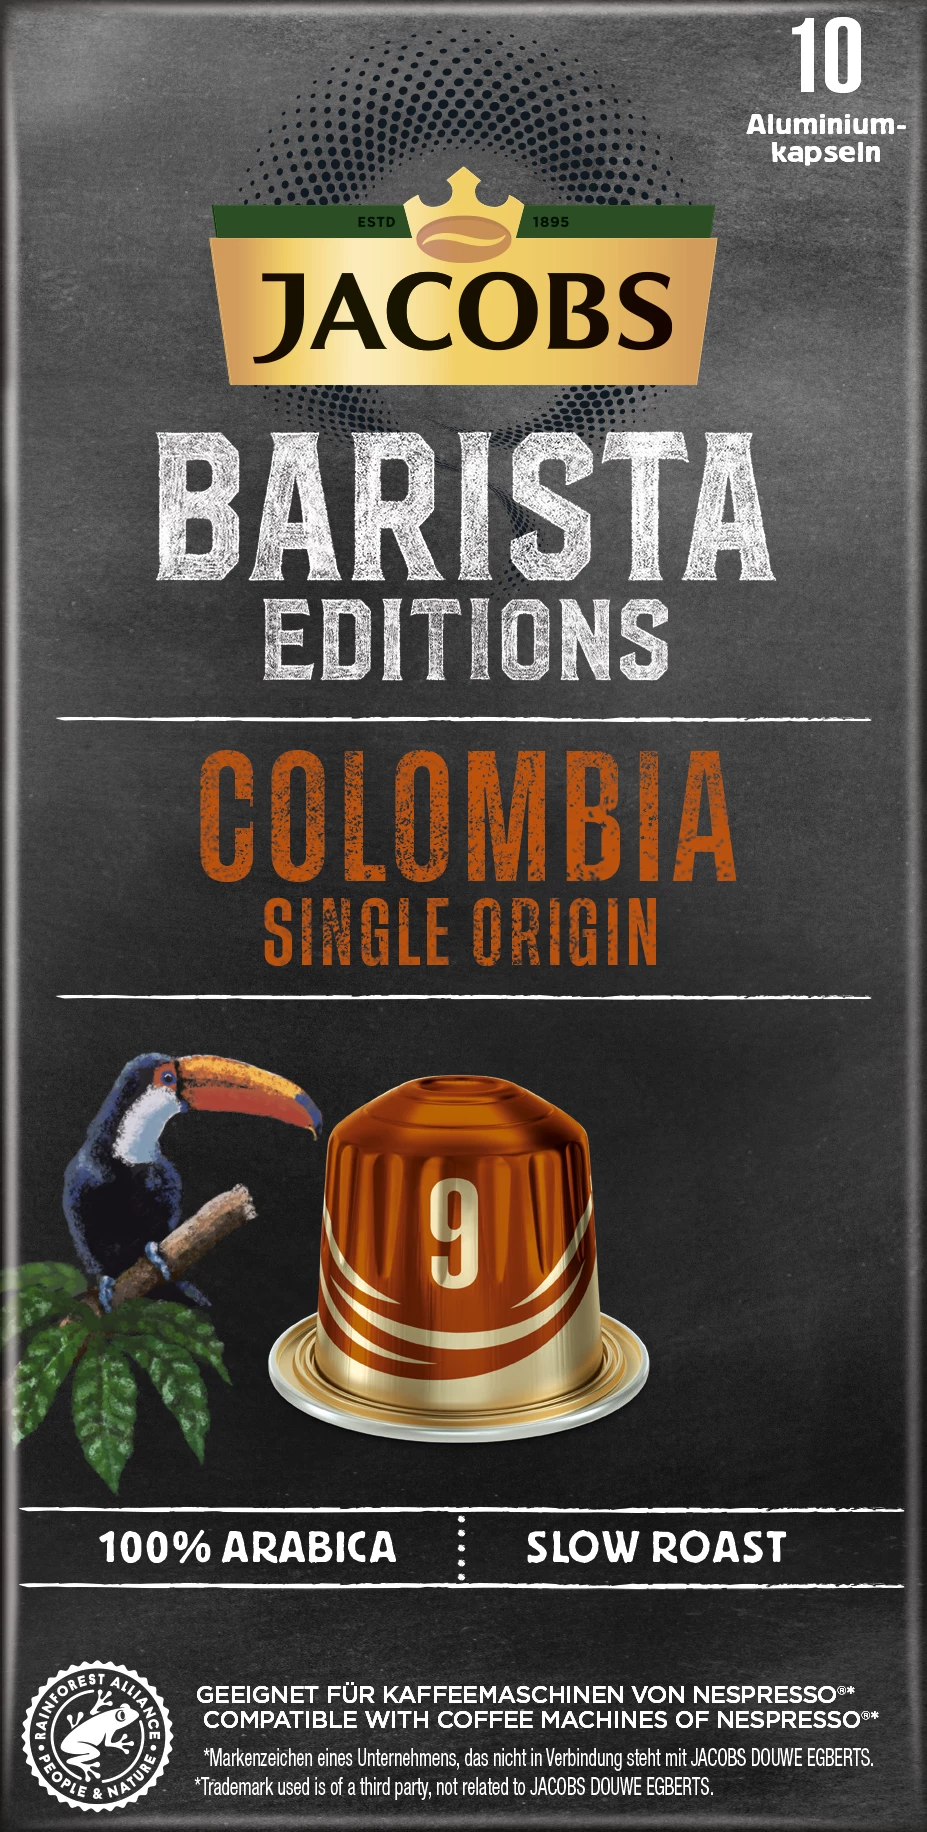 Barista Editions: Colombia Jacobs